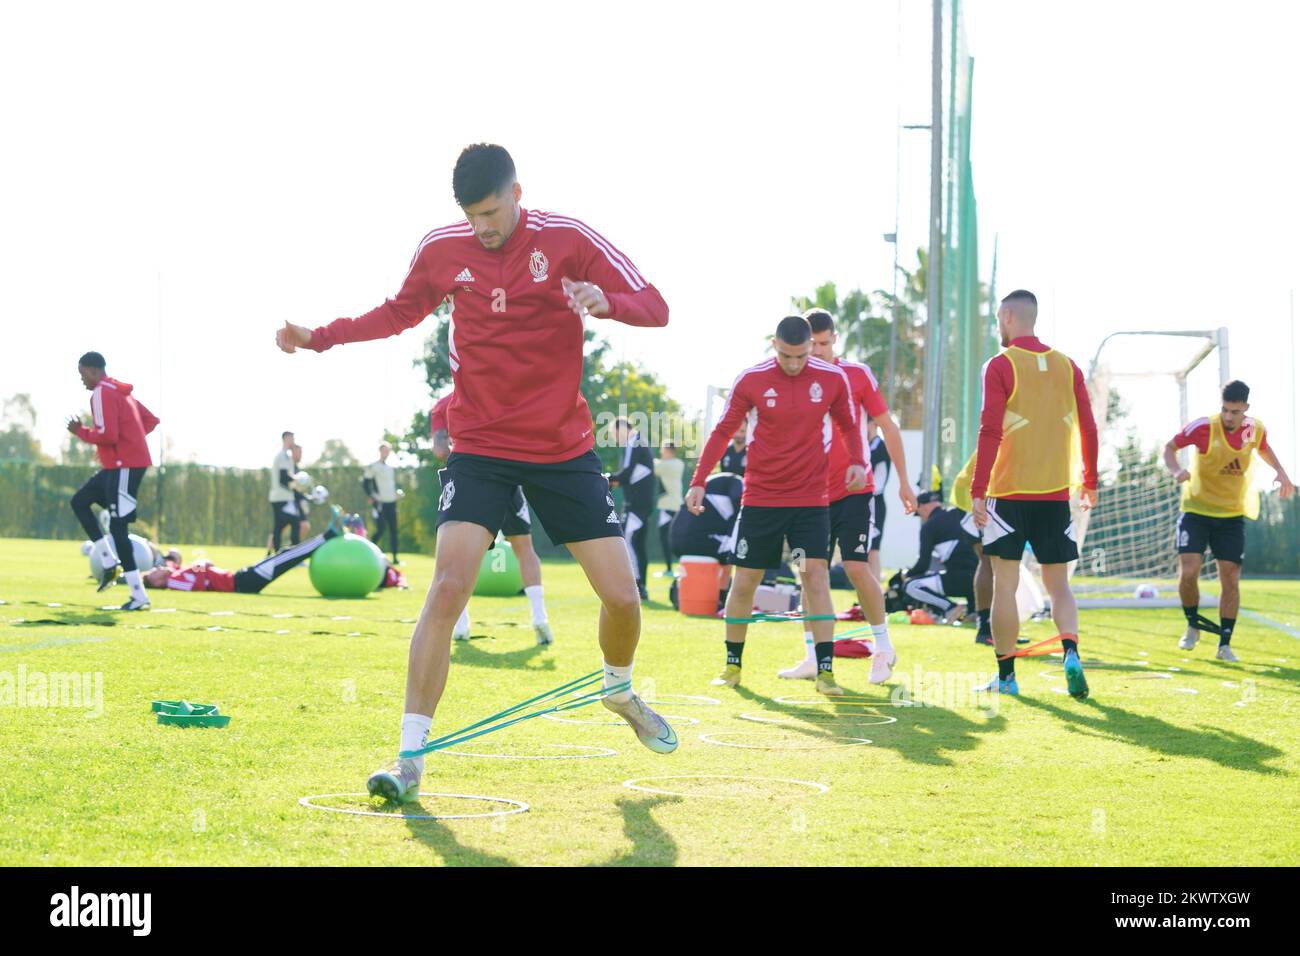 Marbella, Spain, Wednesday 30 November 2022. Standard's Stipe Perica pictured during a training session at the winter training camp of Belgian first division soccer team Standard de Liege in Marbella, Spain, Wednesday 30 November 2022. BELGA PHOTO JOMA GARCIA I GISBERT Stock Photo